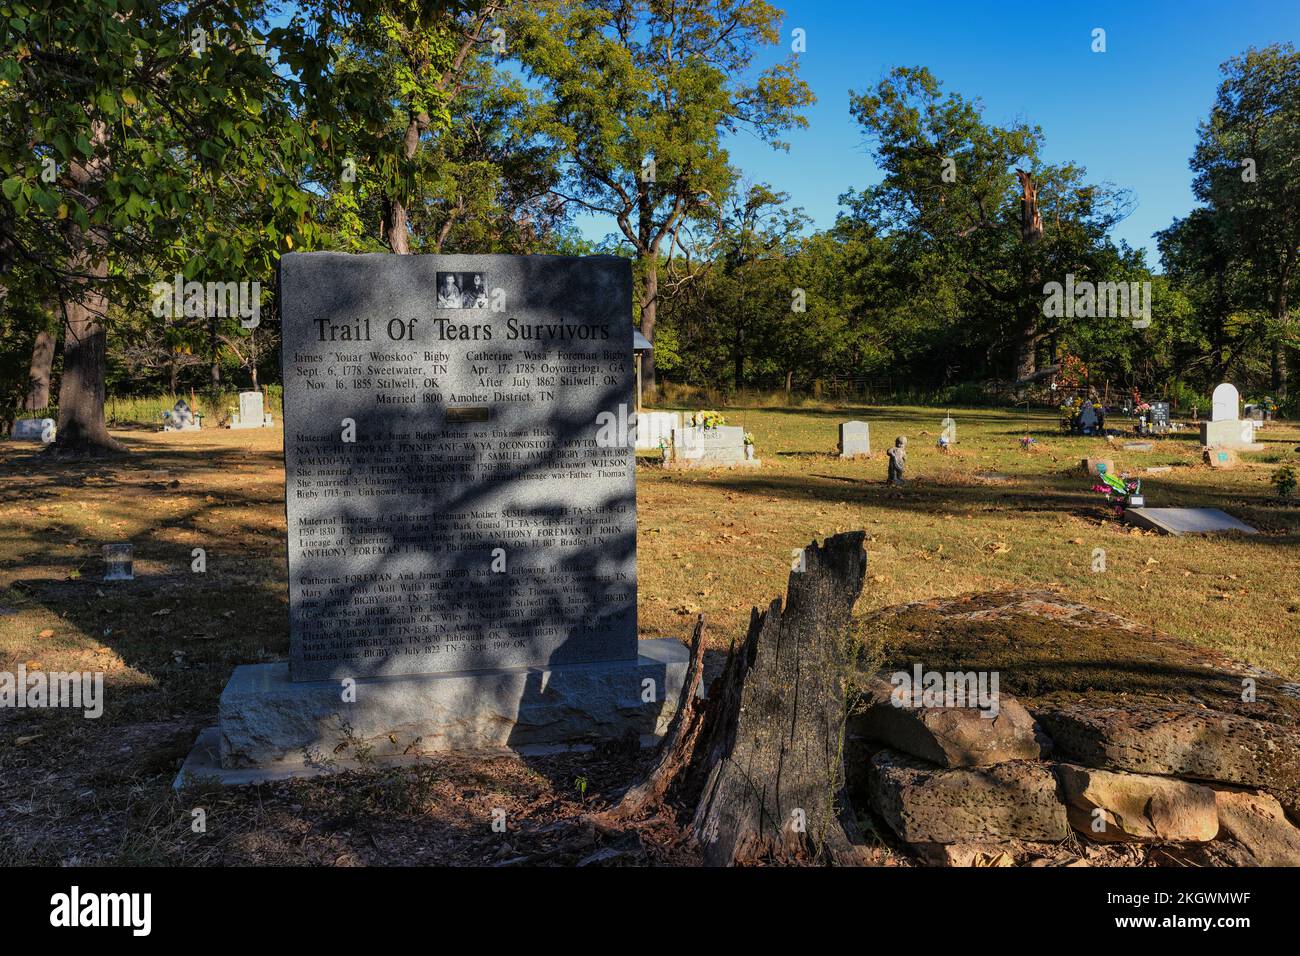 Stilwell, Oklahoma, USA - September 29, 2022: Memorial over the graves og James 'Youar Wooskoo' Bigby and Catherine 'Wasa' Foreman Bigby survivors of Stock Photo